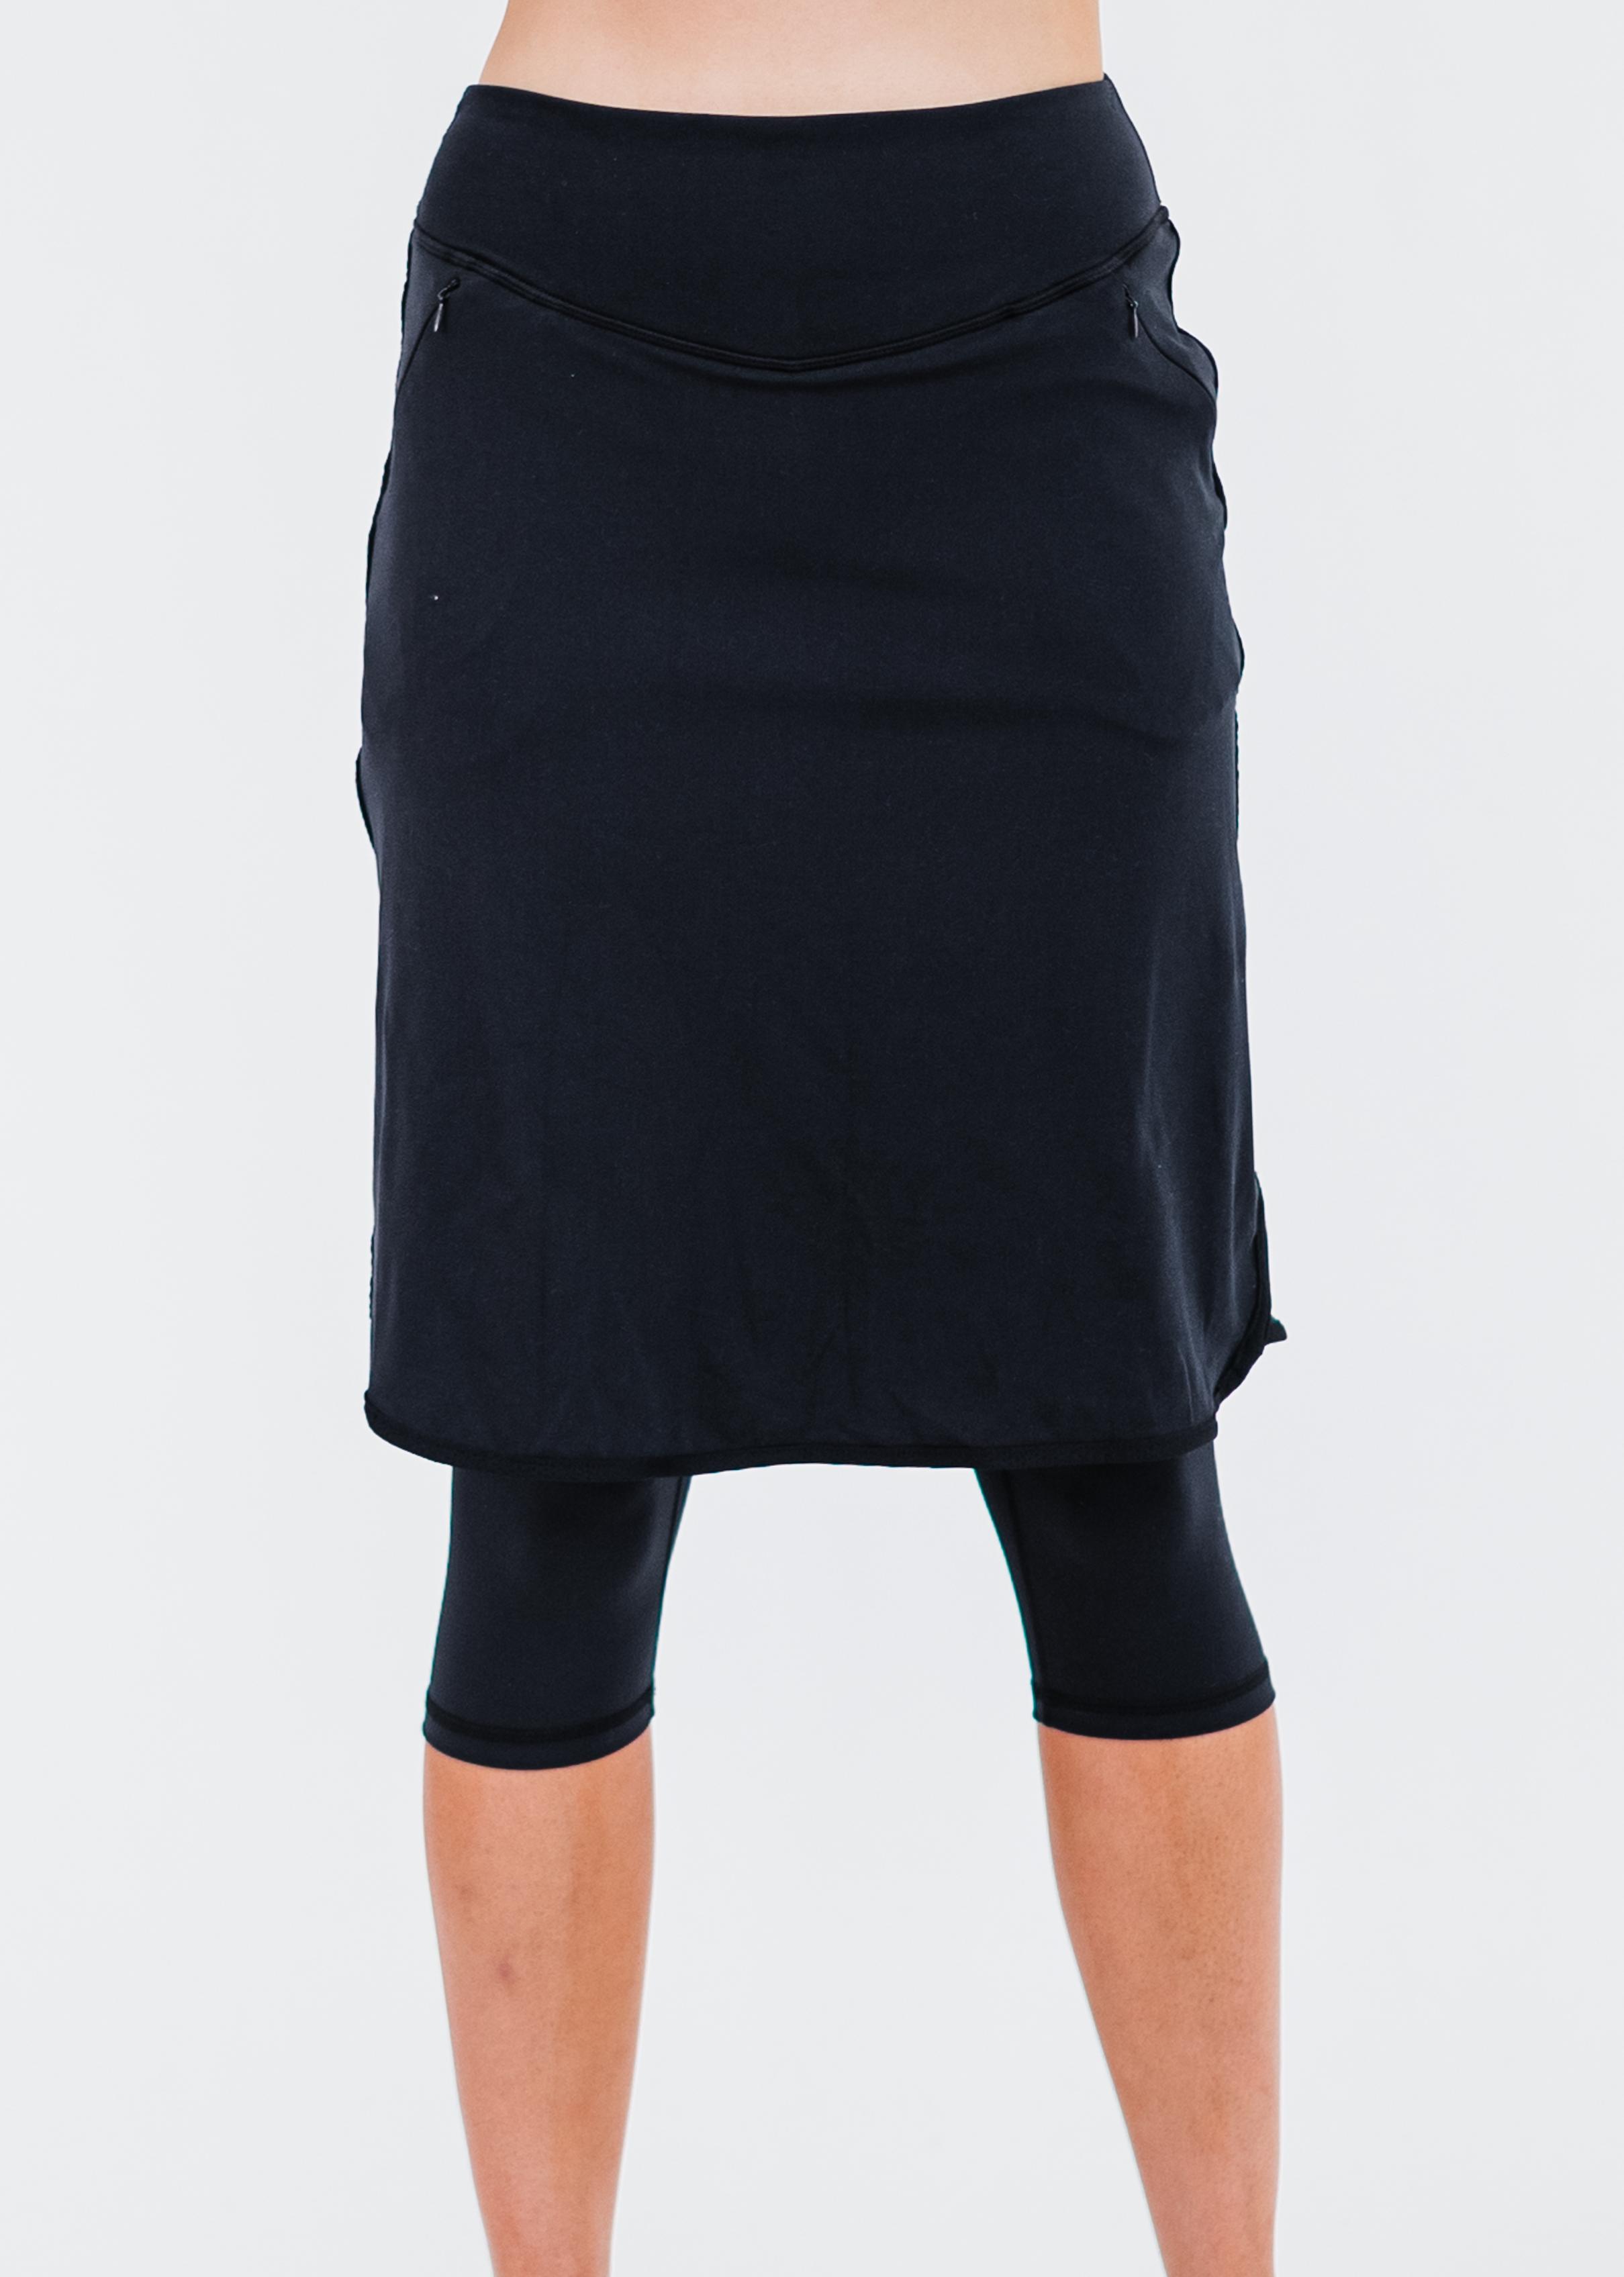 Knee Length Lycra® Sport Skirt with Attached 17 Leggings. Calypsa by ModLi